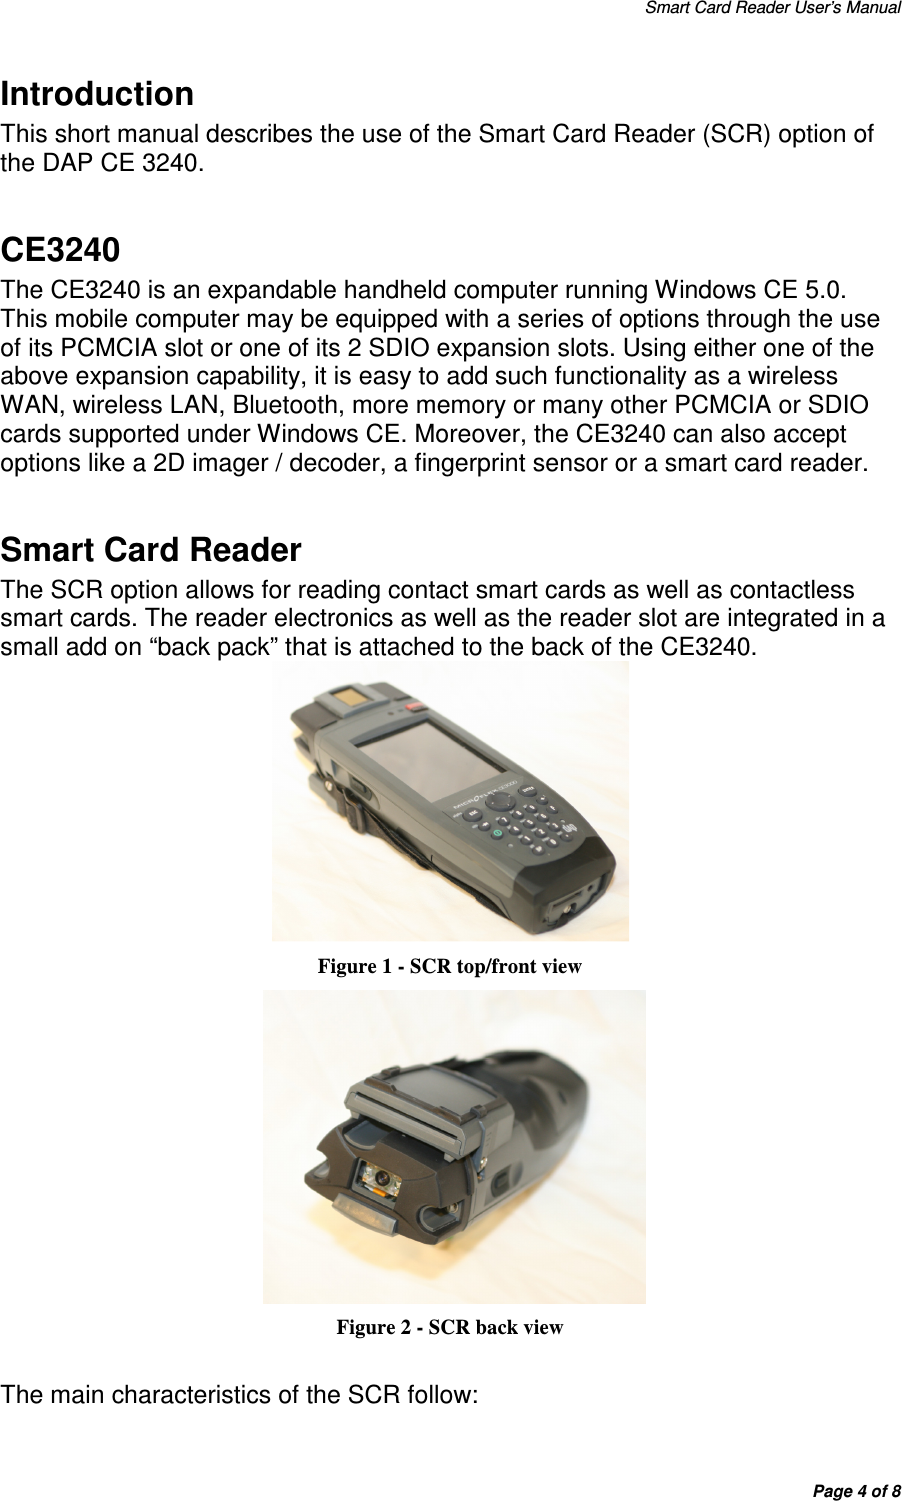 Smart Card Reader User’s Manual Page 4 of 8 Introduction This short manual describes the use of the Smart Card Reader (SCR) option of the DAP CE 3240.   CE3240 The CE3240 is an expandable handheld computer running Windows CE 5.0.  This mobile computer may be equipped with a series of options through the use of its PCMCIA slot or one of its 2 SDIO expansion slots. Using either one of the above expansion capability, it is easy to add such functionality as a wireless WAN, wireless LAN, Bluetooth, more memory or many other PCMCIA or SDIO cards supported under Windows CE. Moreover, the CE3240 can also accept options like a 2D imager / decoder, a fingerprint sensor or a smart card reader.  Smart Card Reader The SCR option allows for reading contact smart cards as well as contactless smart cards. The reader electronics as well as the reader slot are integrated in a small add on “back pack” that is attached to the back of the CE3240.   Figure 1 - SCR top/front view   Figure 2 - SCR back view  The main characteristics of the SCR follow: 